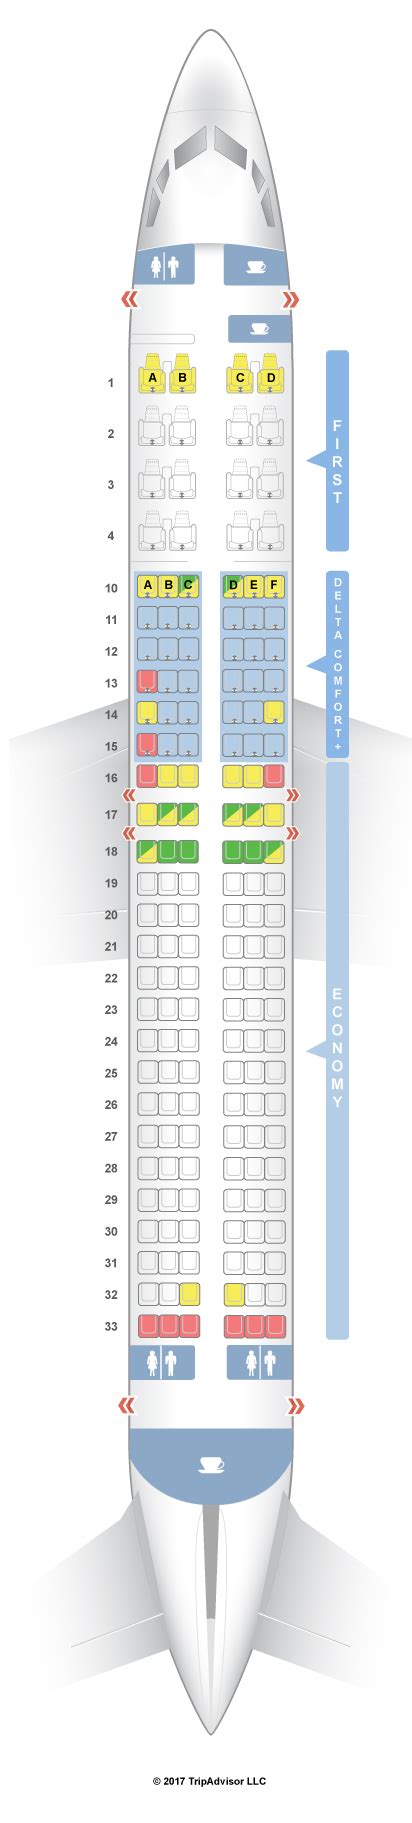 Delta Airlines Boeing 737 Seating Chart Hot Sex Picture